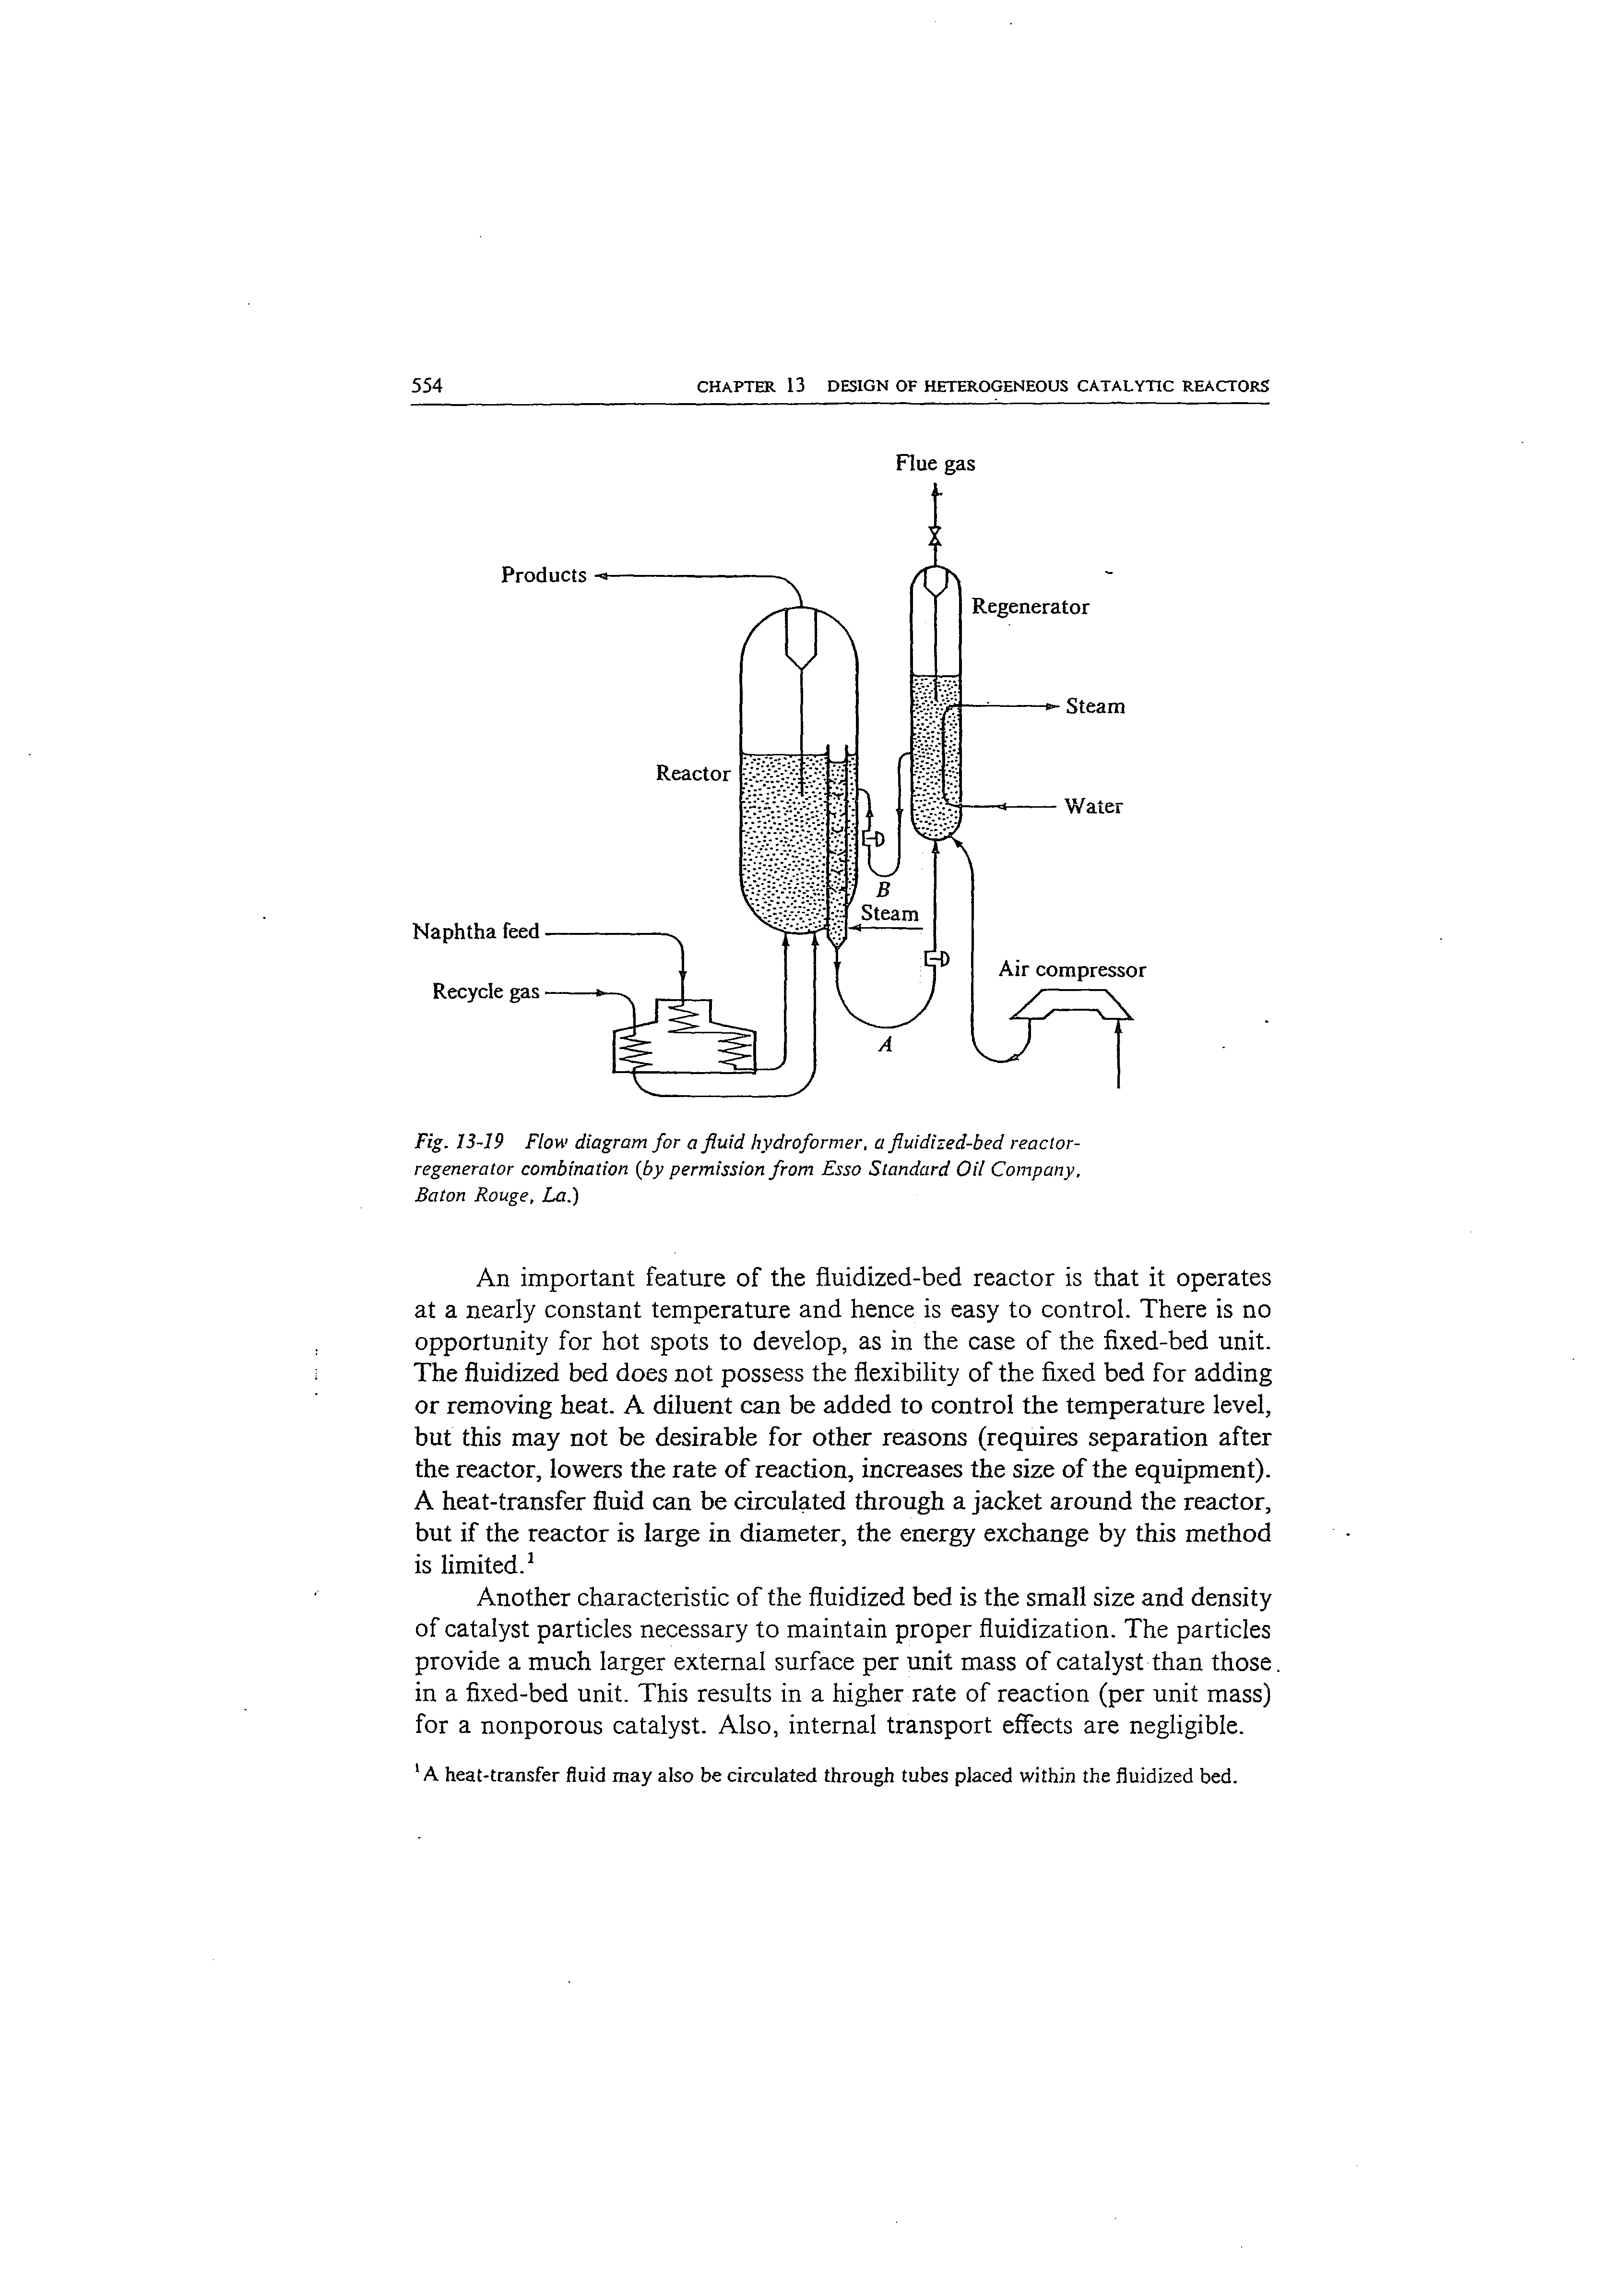 Fig. 13-19 Flow diagram for a fluid hydroformer, a fluidized-bed reactor-regenerator combination by permission from Esso Standard Oil Company, Baton Rouge, La.)...